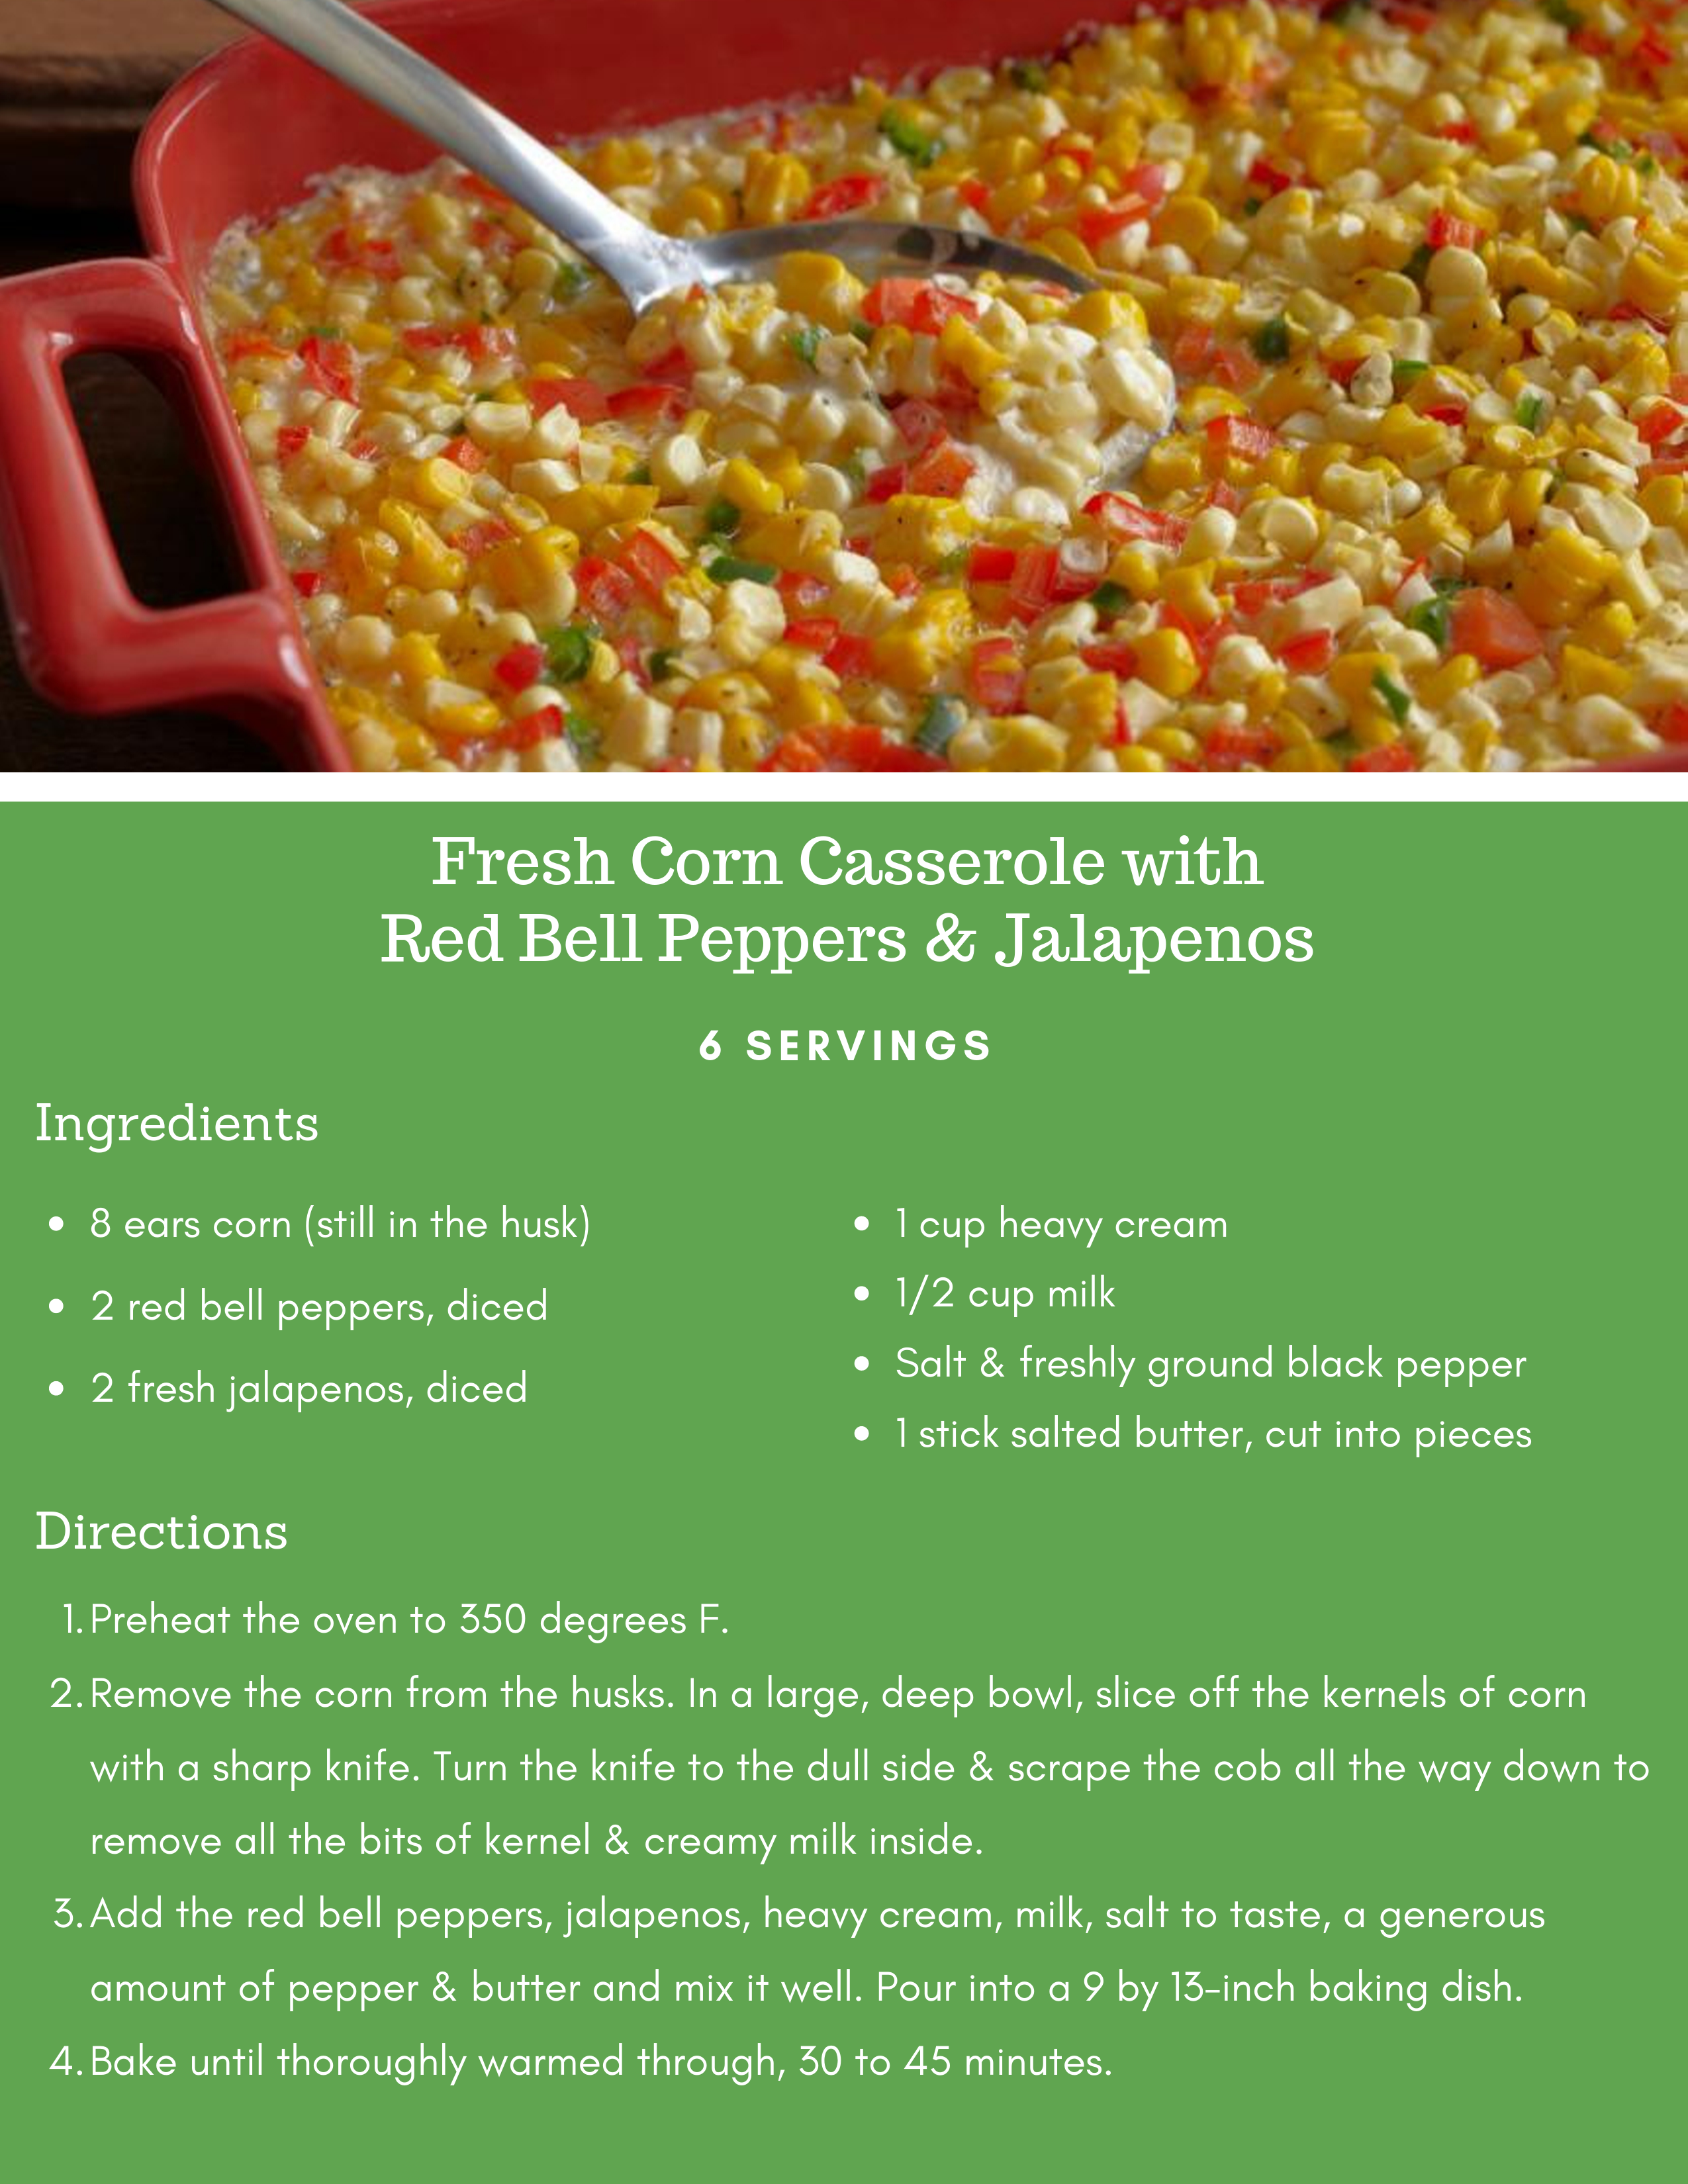 Fresh Corn Casserole with Red Bell Peppers & Jalapenos